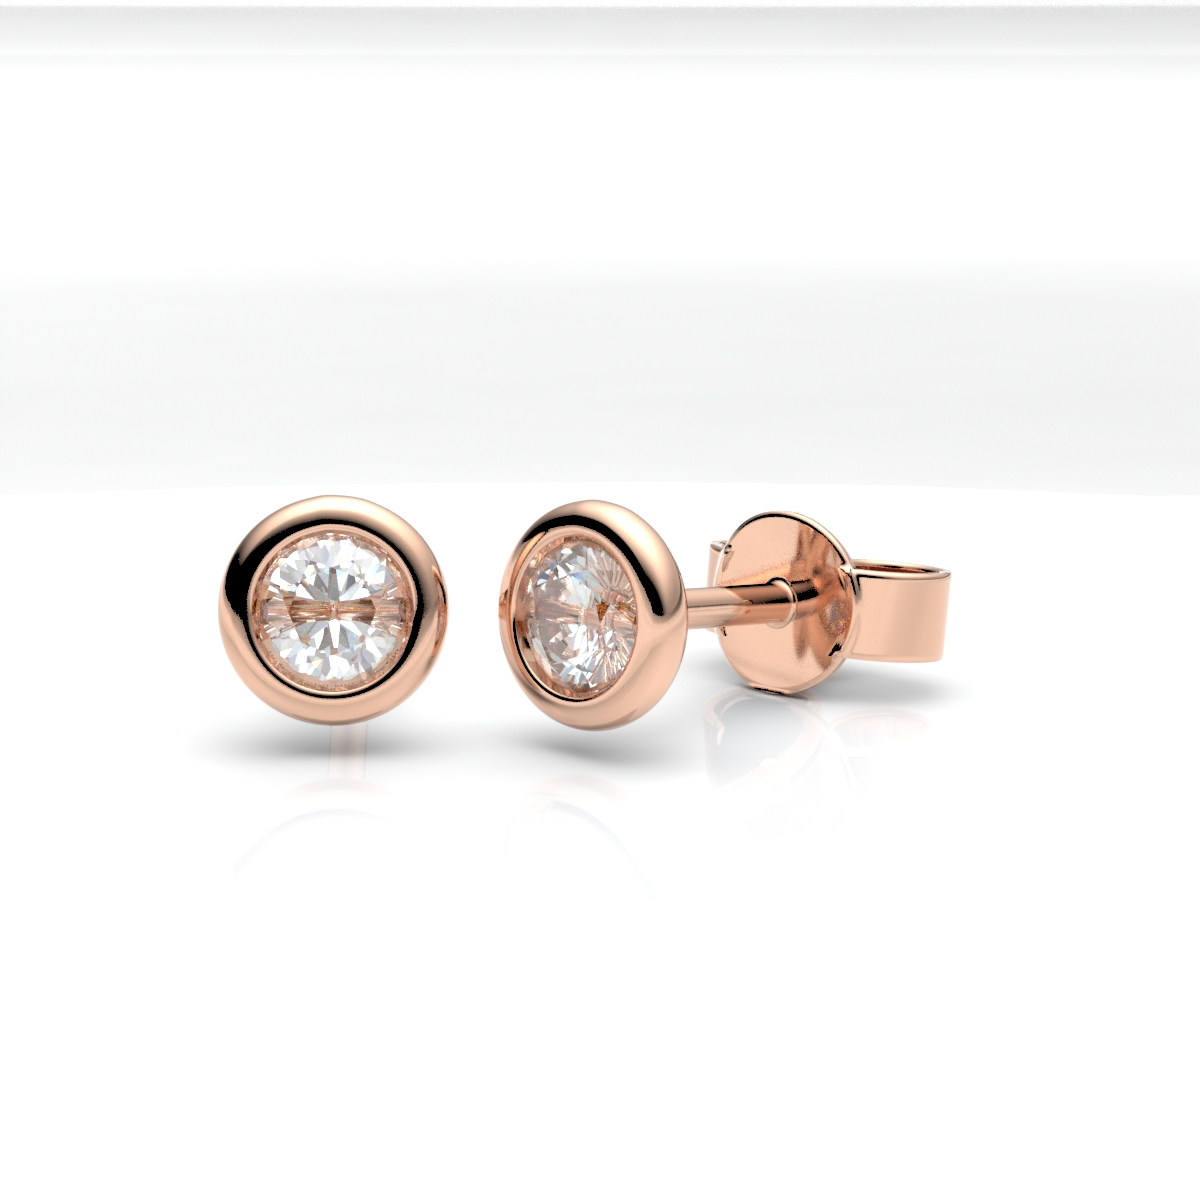 012504-5H34-001 | Ohrstecker Lehrte 012504 585 Roségold<br> Brillant 0,300 ct H-SI ∅ 3.4mm<br>100% Made in Germany  